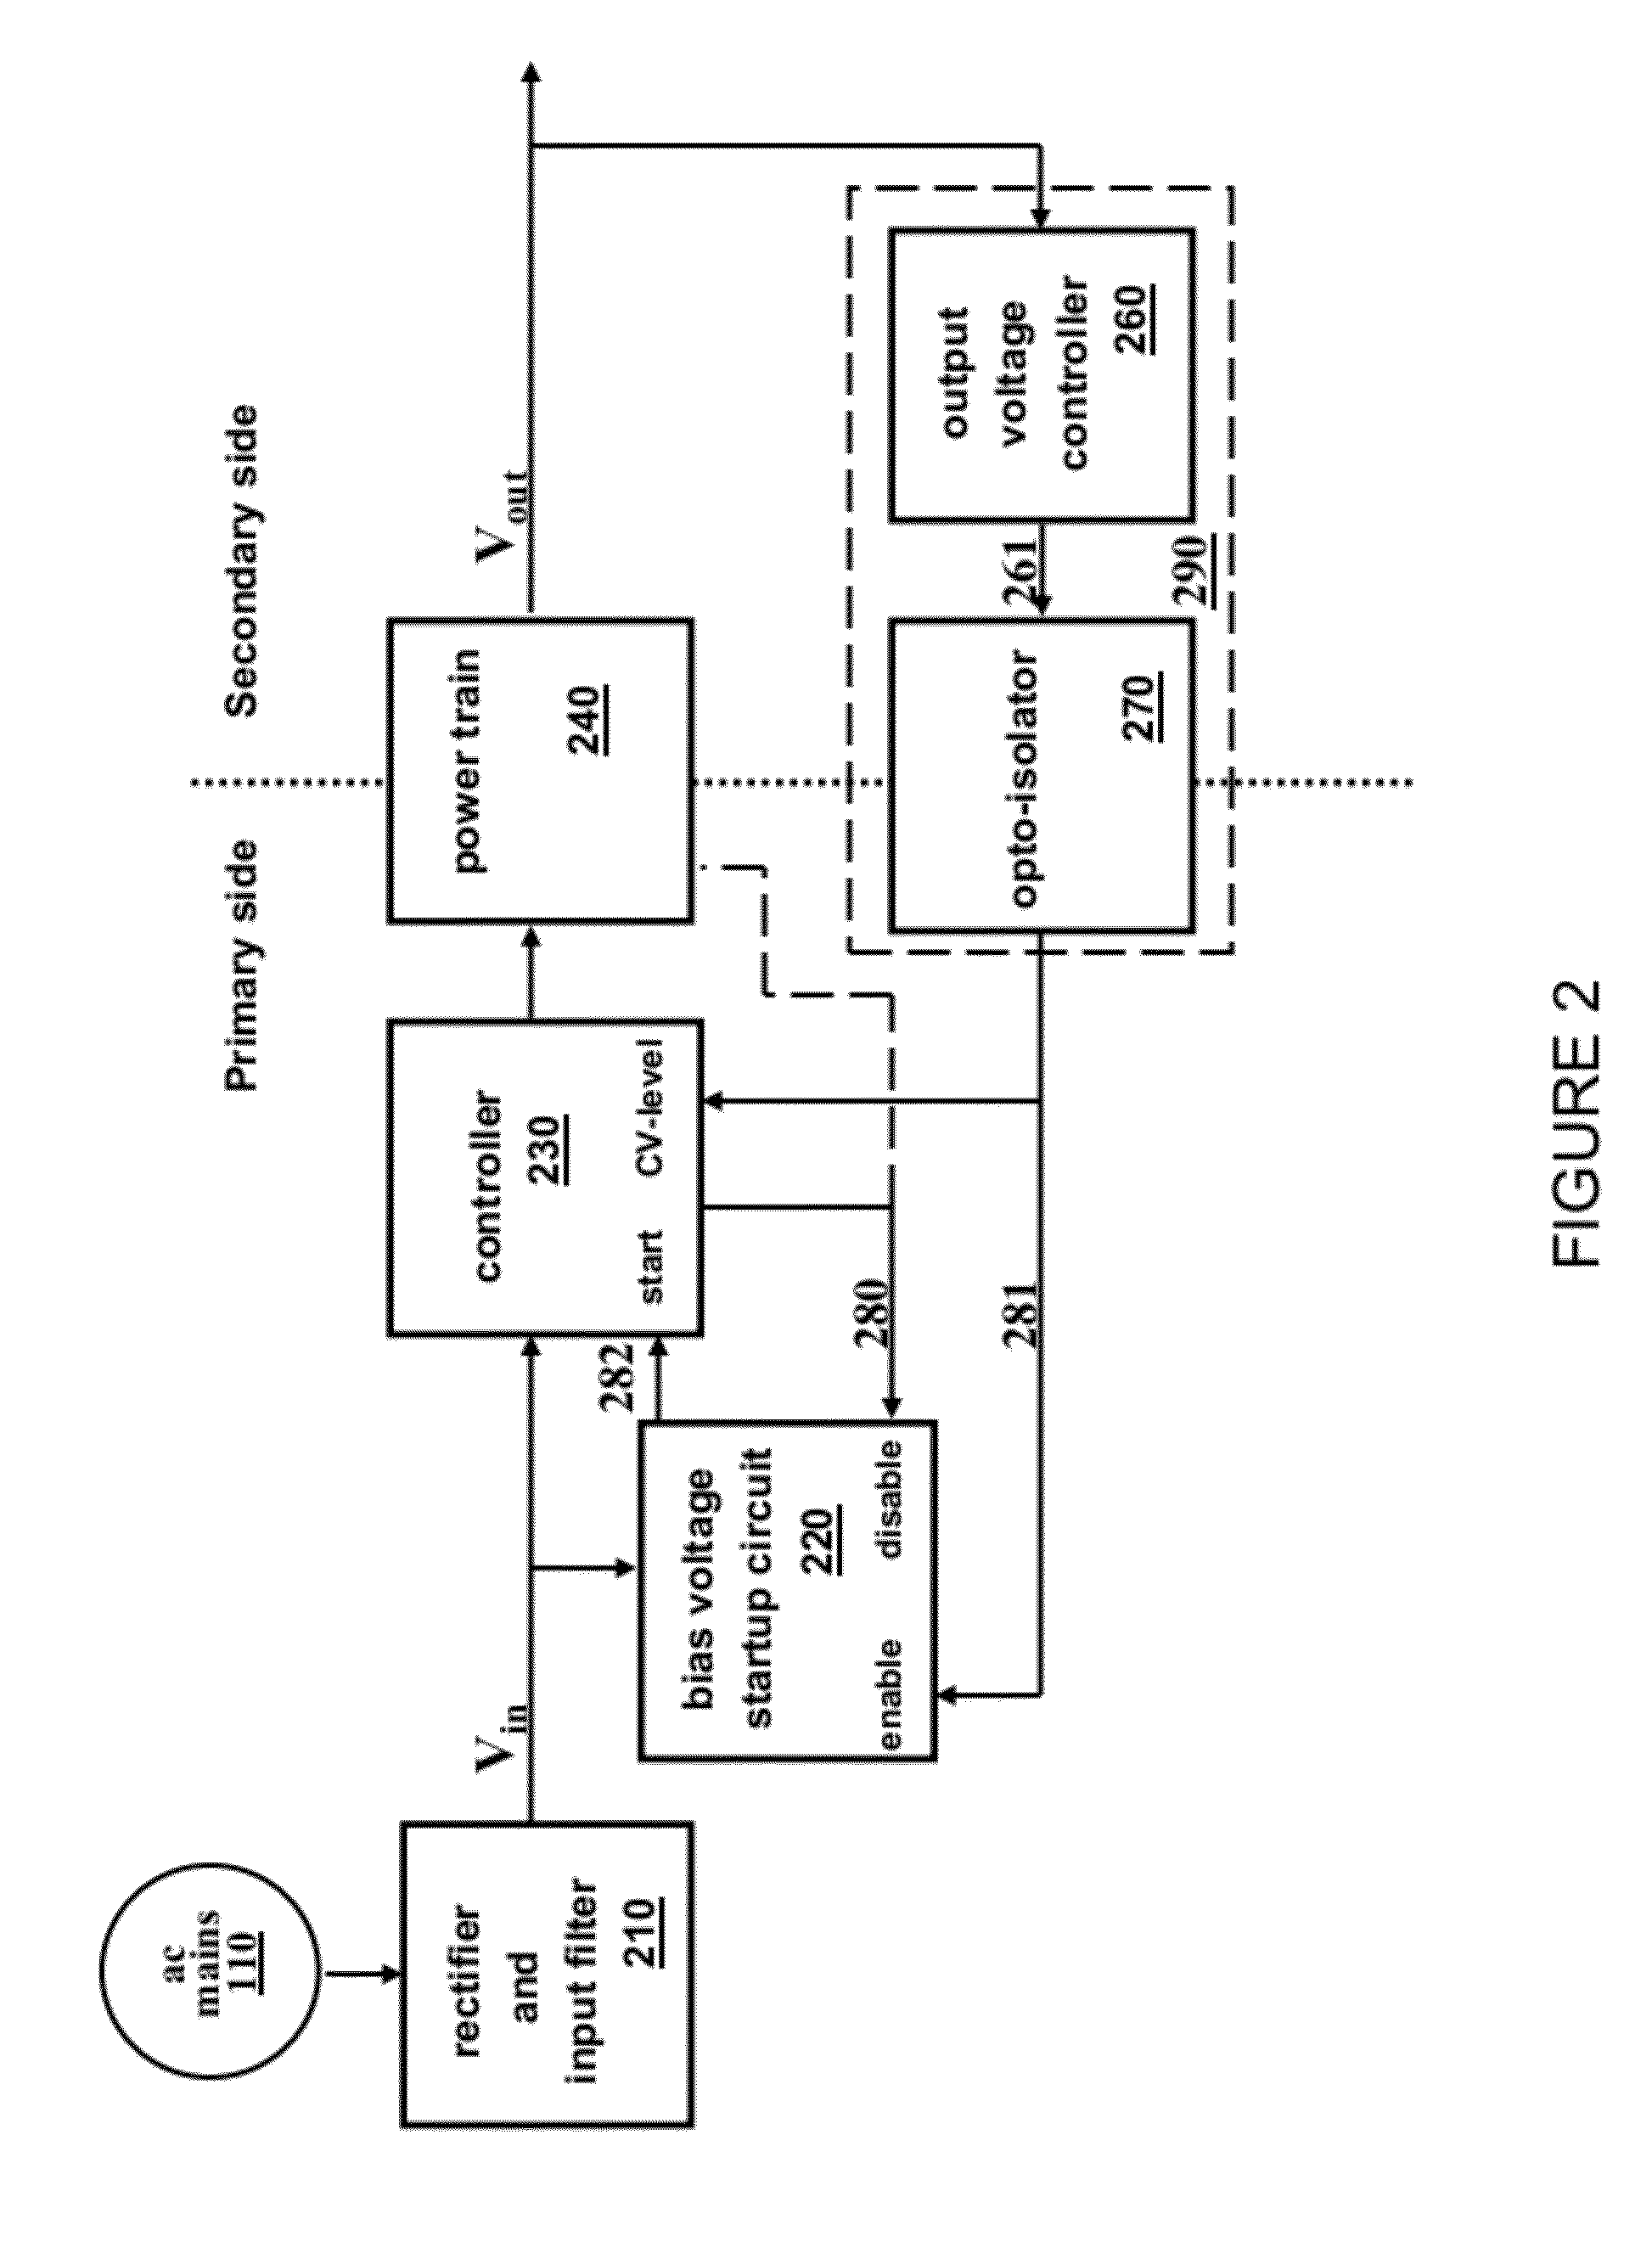 Power Converter with Reduced Power Dissipation